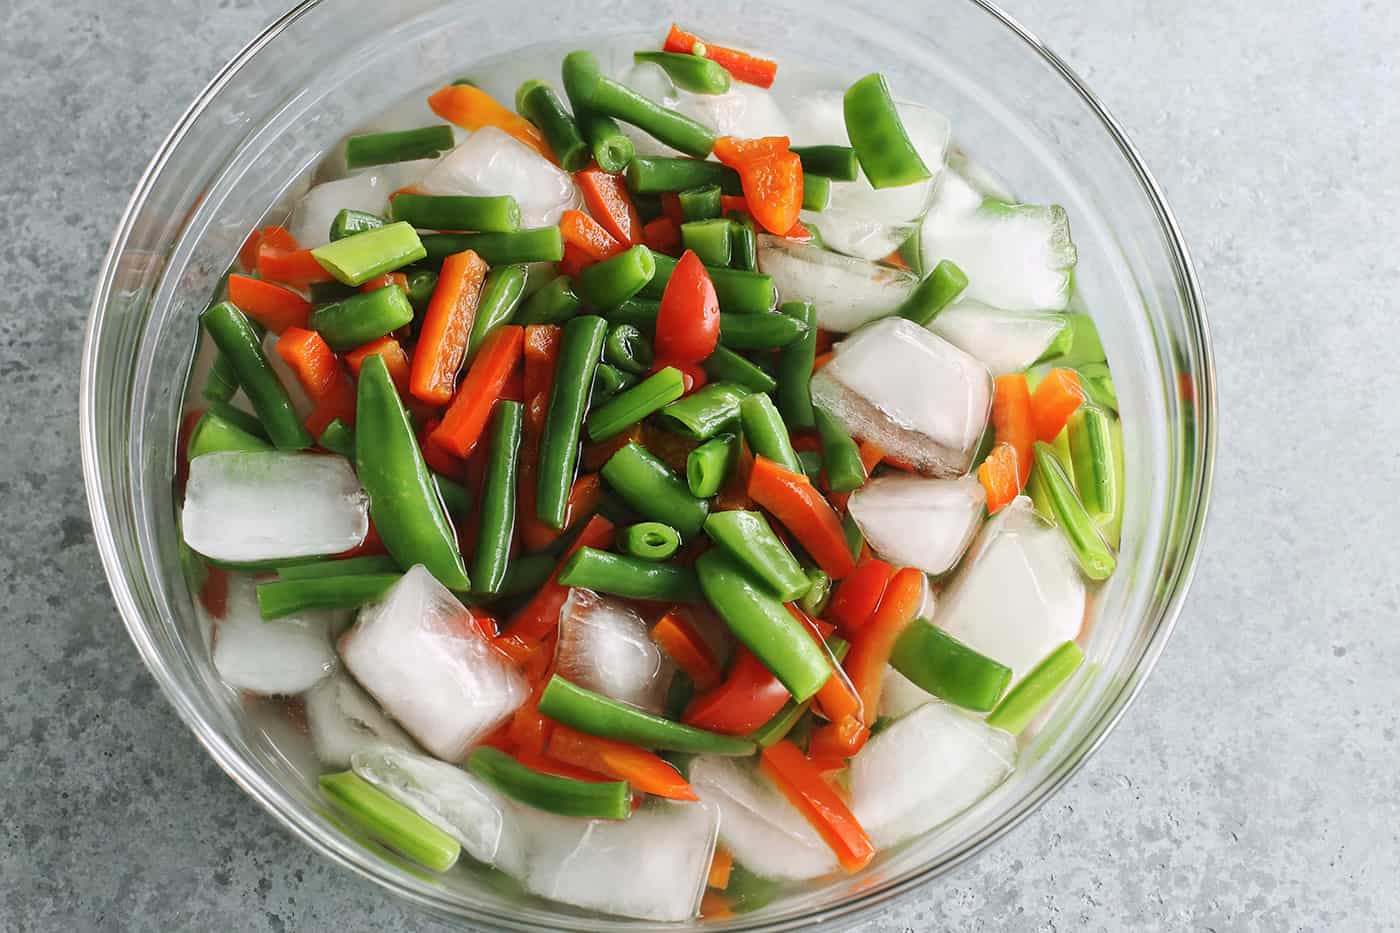 green beans, pea pods, and red pepper in a clear bowl (ice bath)